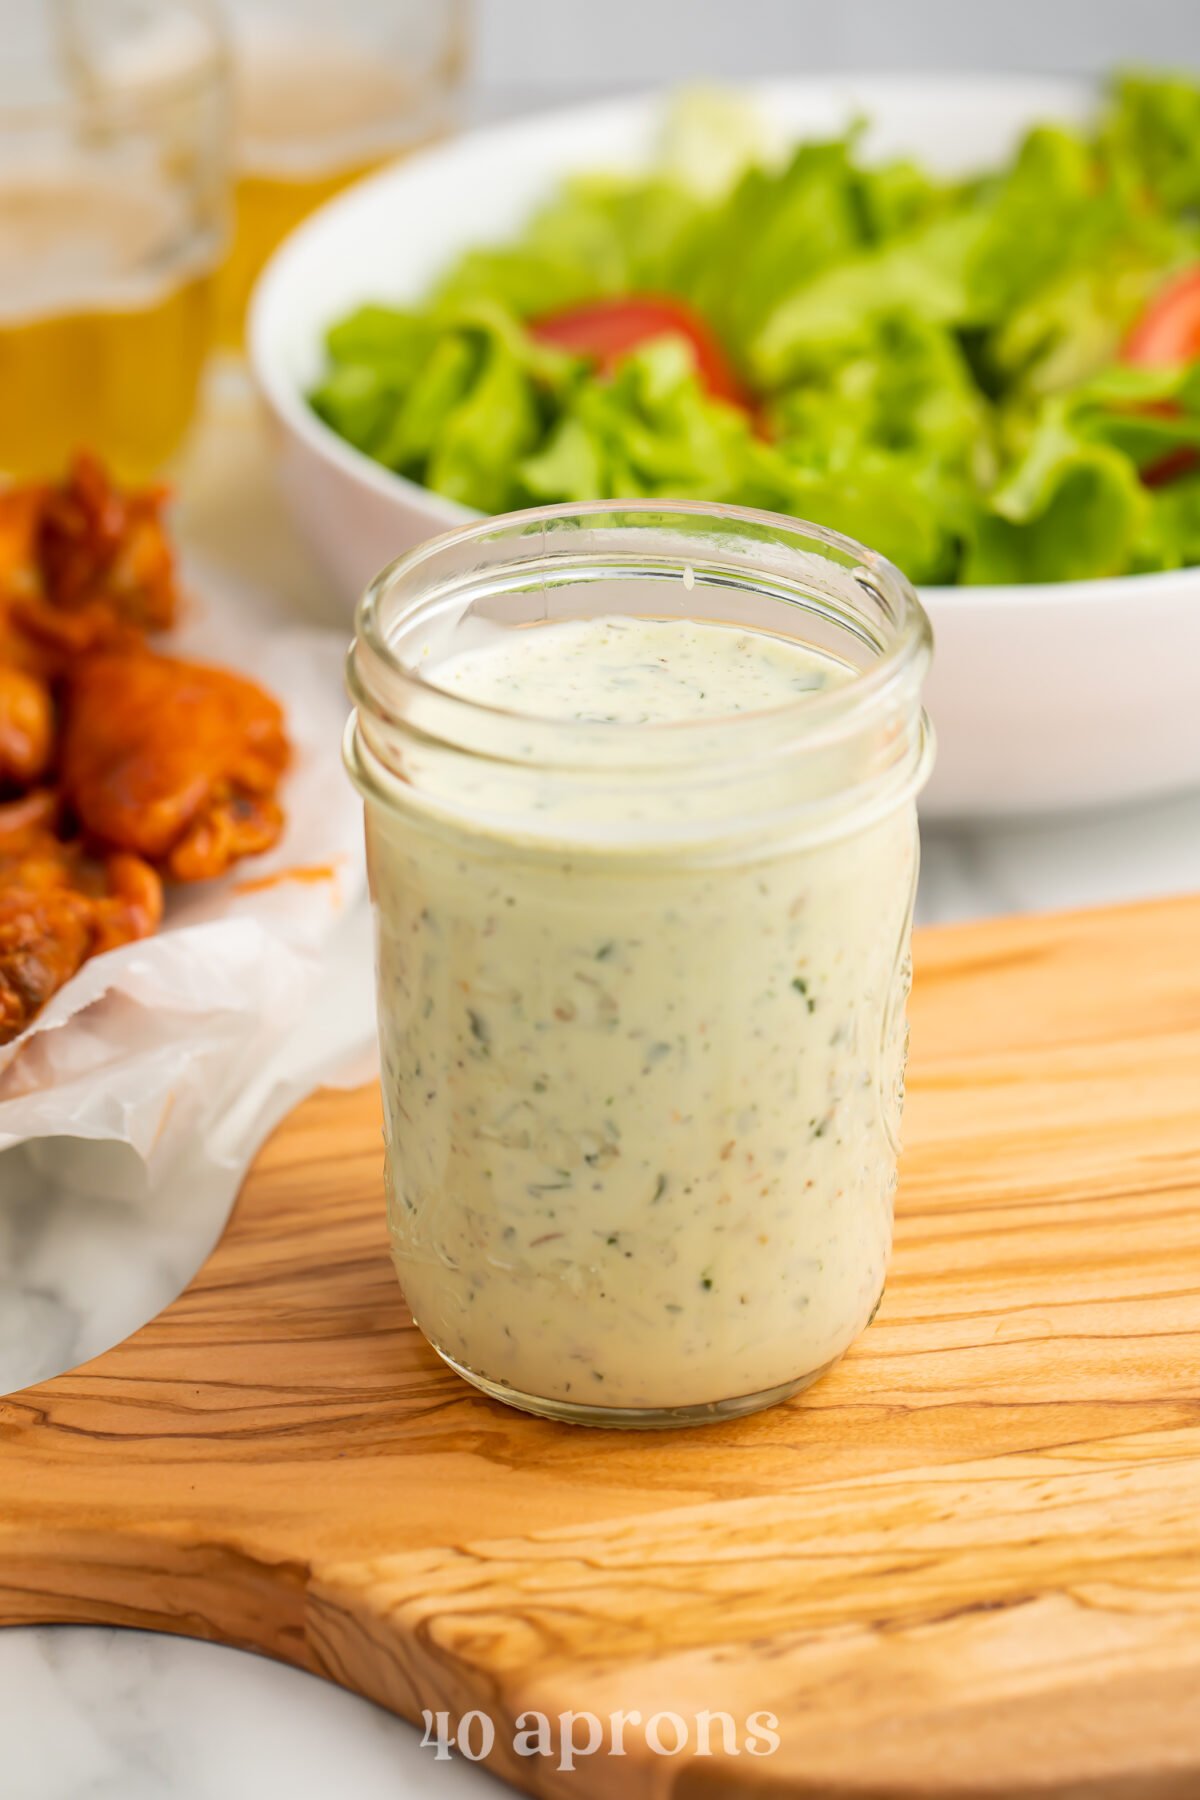 A mason jar of ranch dressing peppered with green specks from fresh herbs sits on a wooden cutting board, in front of a bright green salad and orange chicken wings.